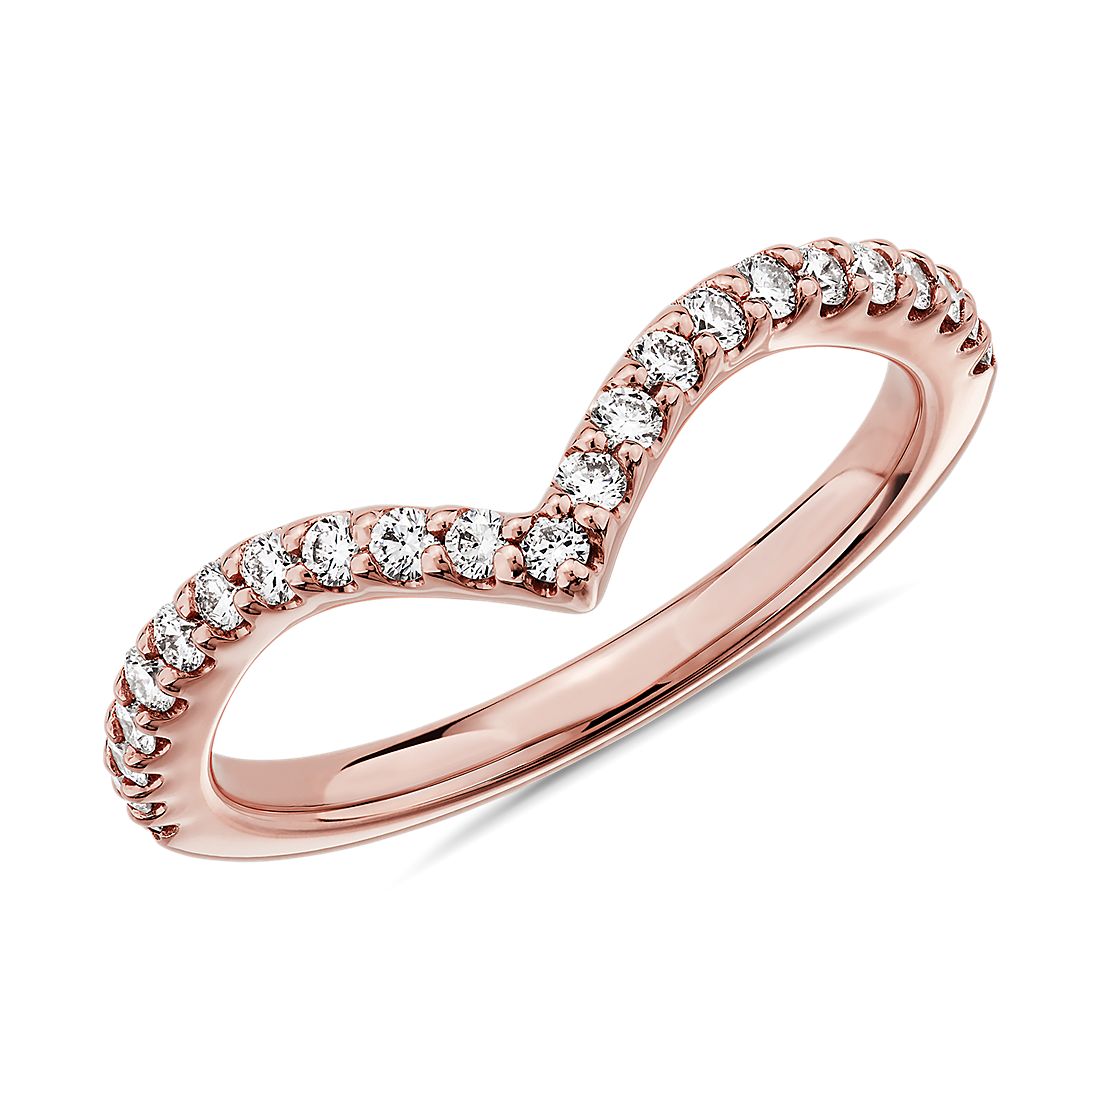 Bishilin Rose Gold Plated V Shaped Zirconia Wedding Engagement Rings for Womens Size 7